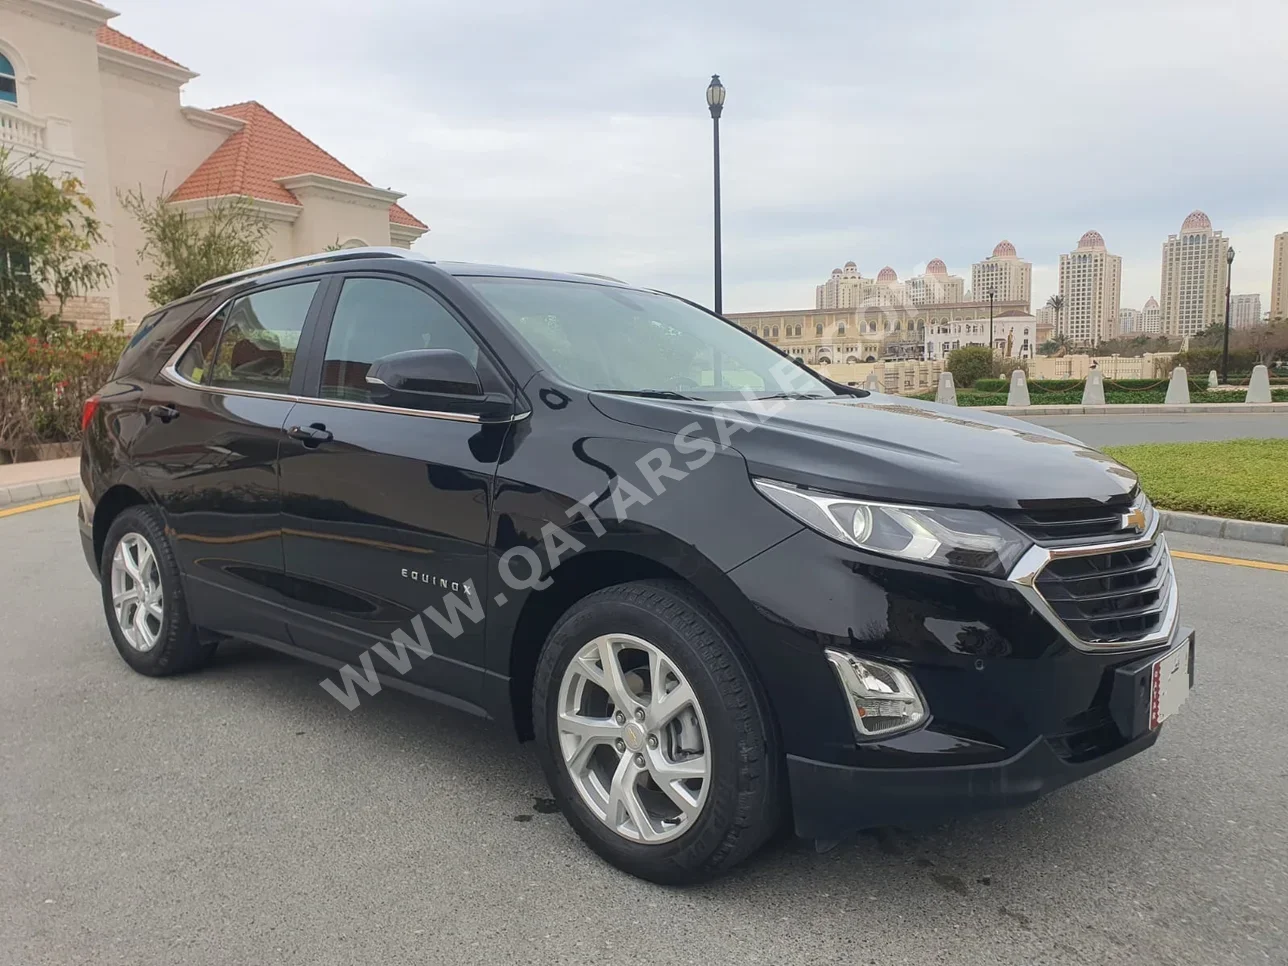  Chevrolet  Equinox  LT  2021  Automatic  45,000 Km  4 Cylinder  Front Wheel Drive (FWD)  SUV  Black  With Warranty